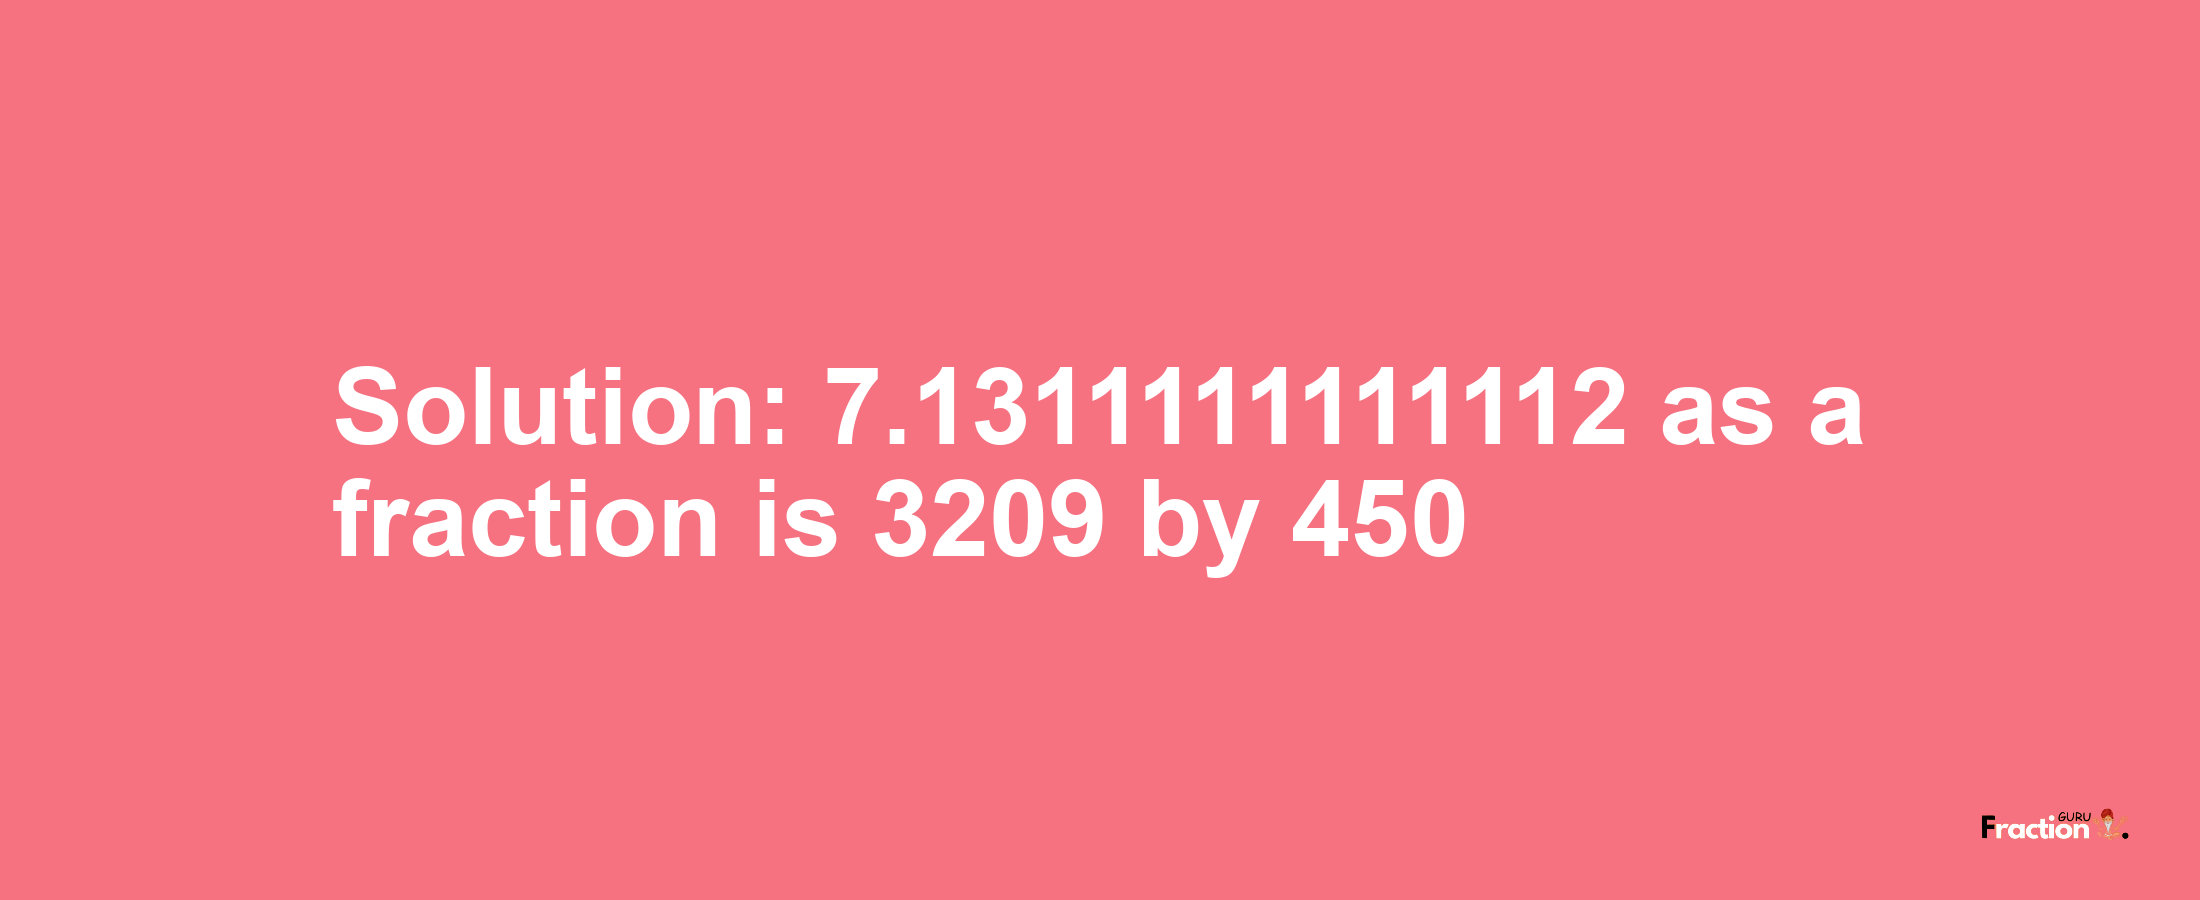 Solution:7.1311111111112 as a fraction is 3209/450